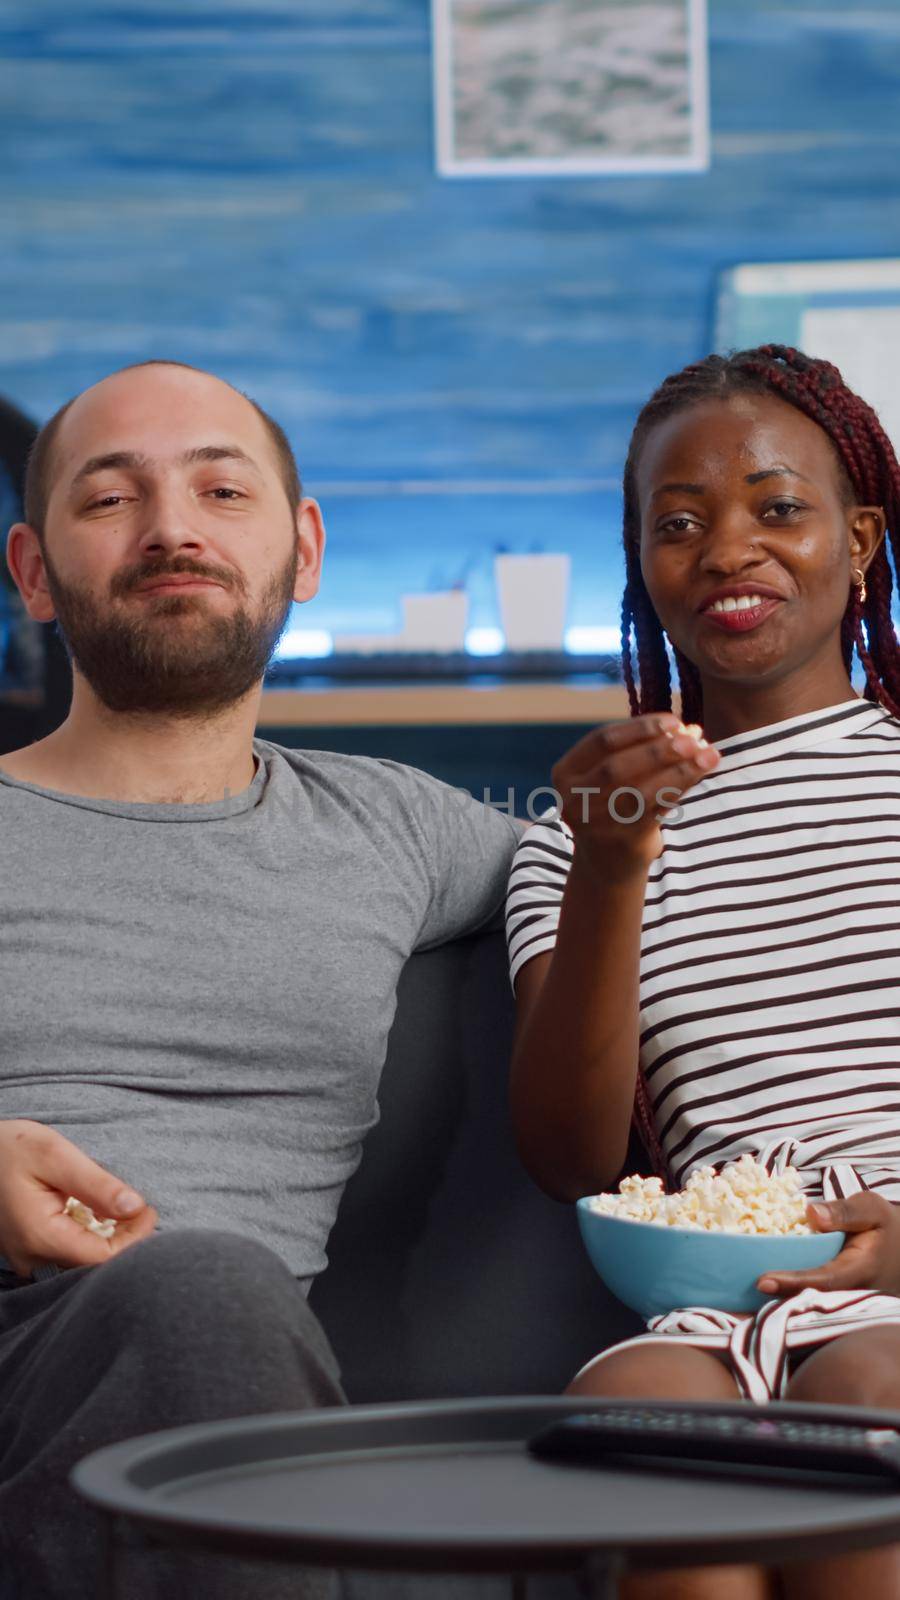 Young interracial couple watching movie on TV with popcorn sitting in living room. Mixed race partners looking at camera while eating snack and relaxing together at home on couch